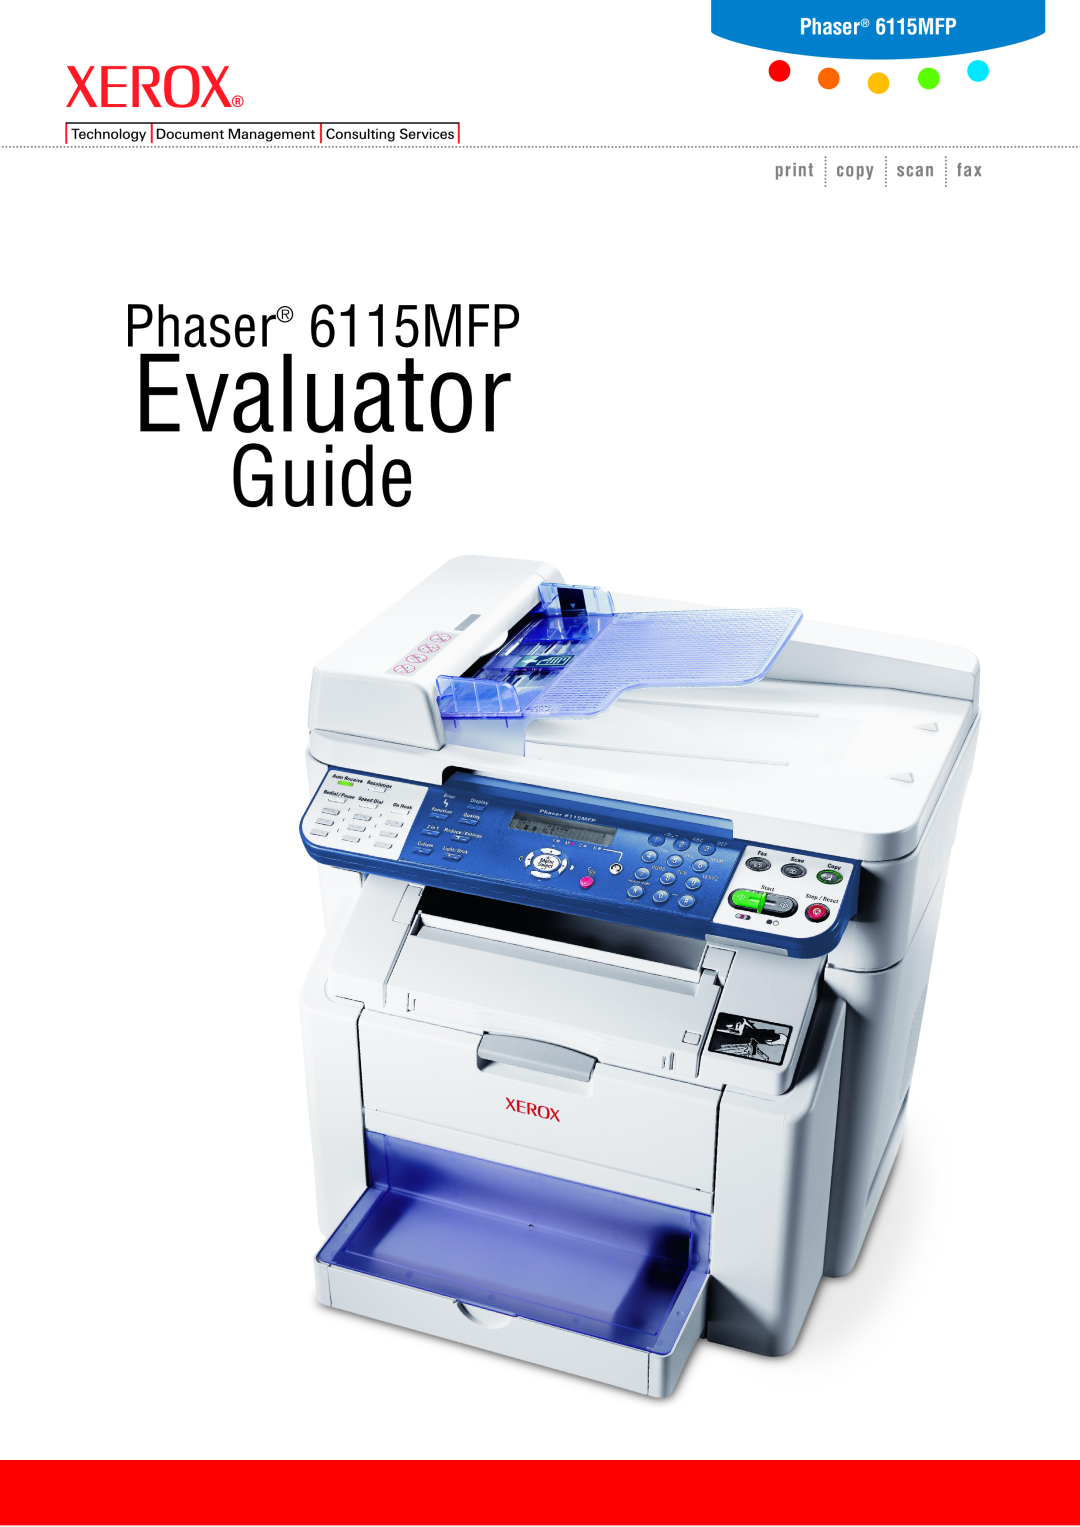 Xerox user manual More Information, Phaser 6115MFP, Visit the Support website for, Print and Scan drivers and utilities 